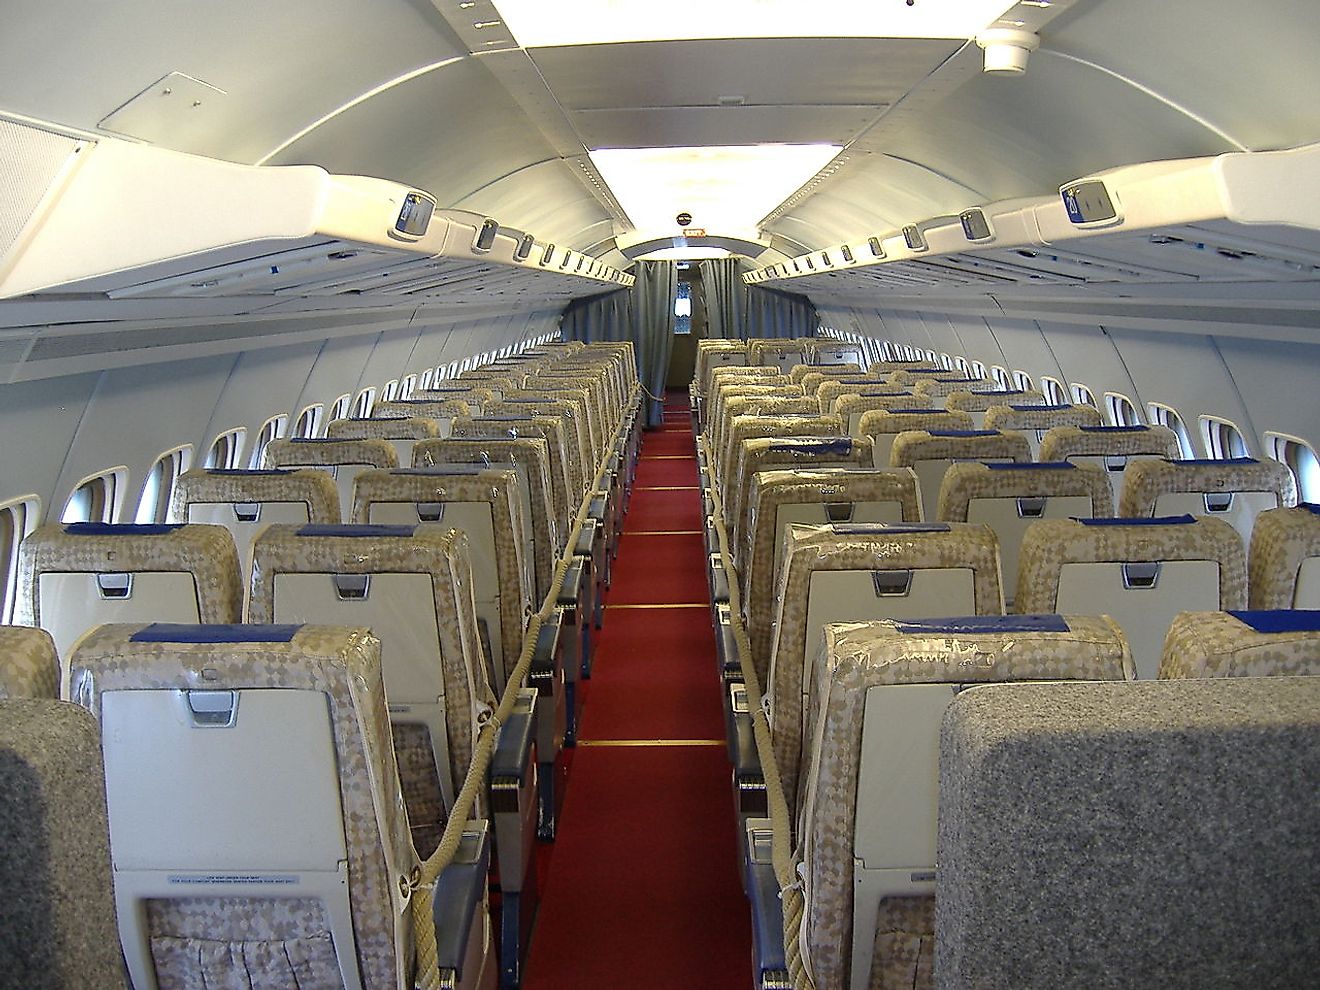  Interior of a Convair 990 operated by Swissair now on public display in the Swiss transportation museum. Image credit: Prijs/Wikimedia.org